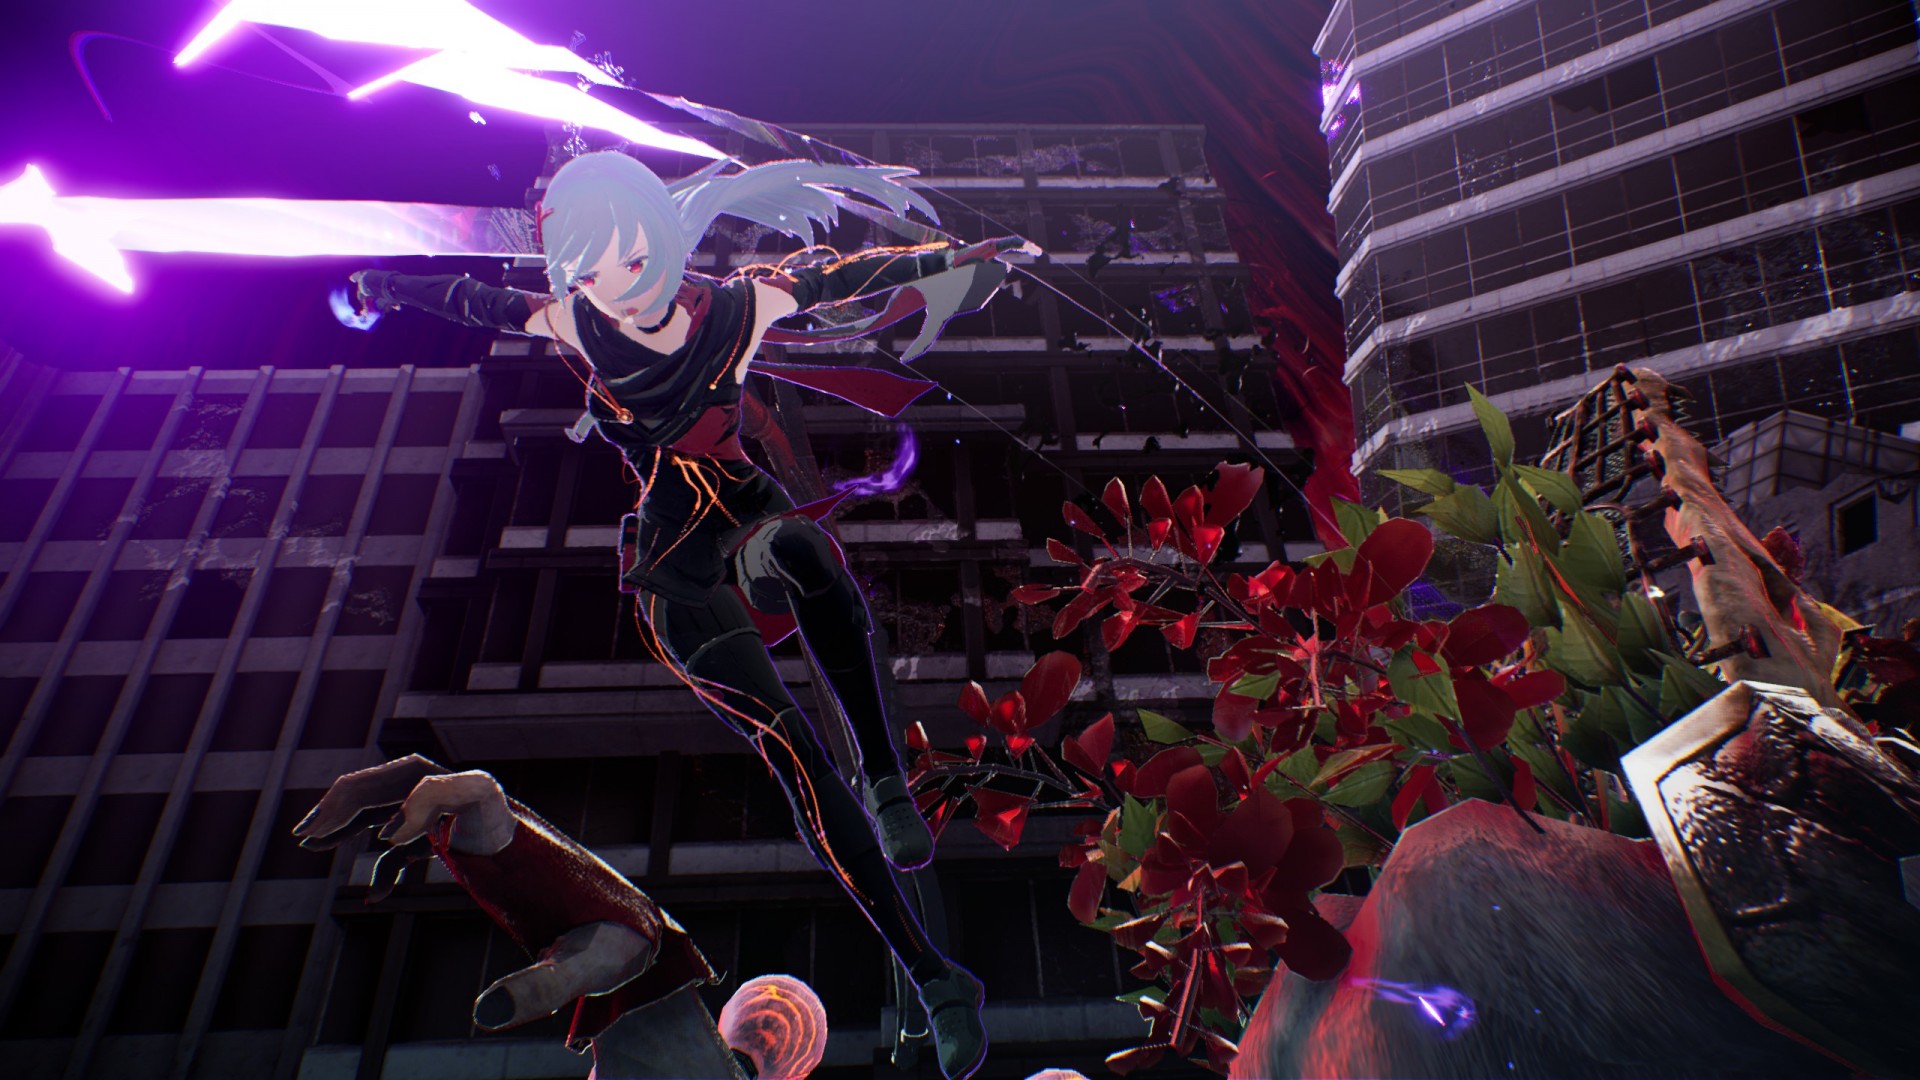 Scarlet Nexus Review Impressions: Is the Anime ARPG Worth It